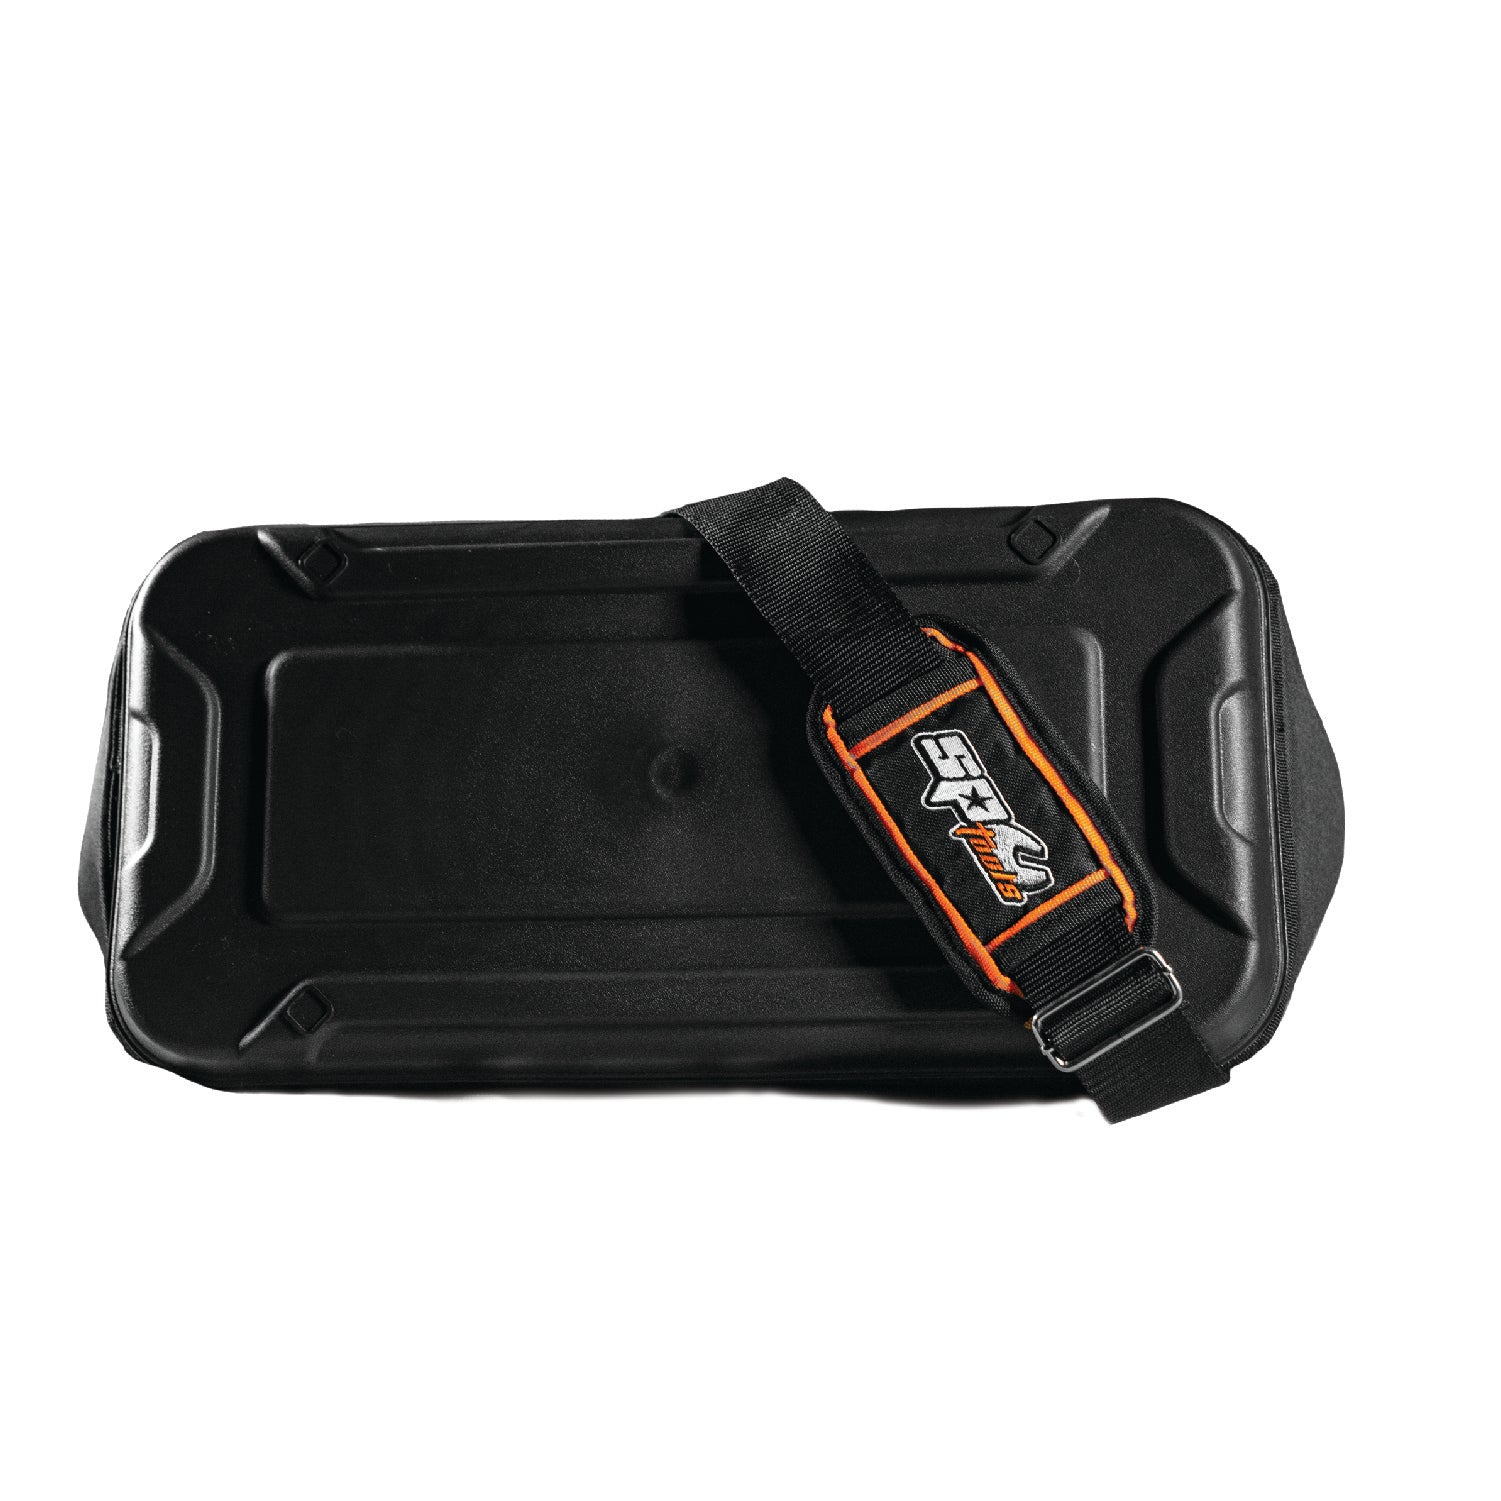 SP TOOLS OPEN MOUTH TOOL BAG